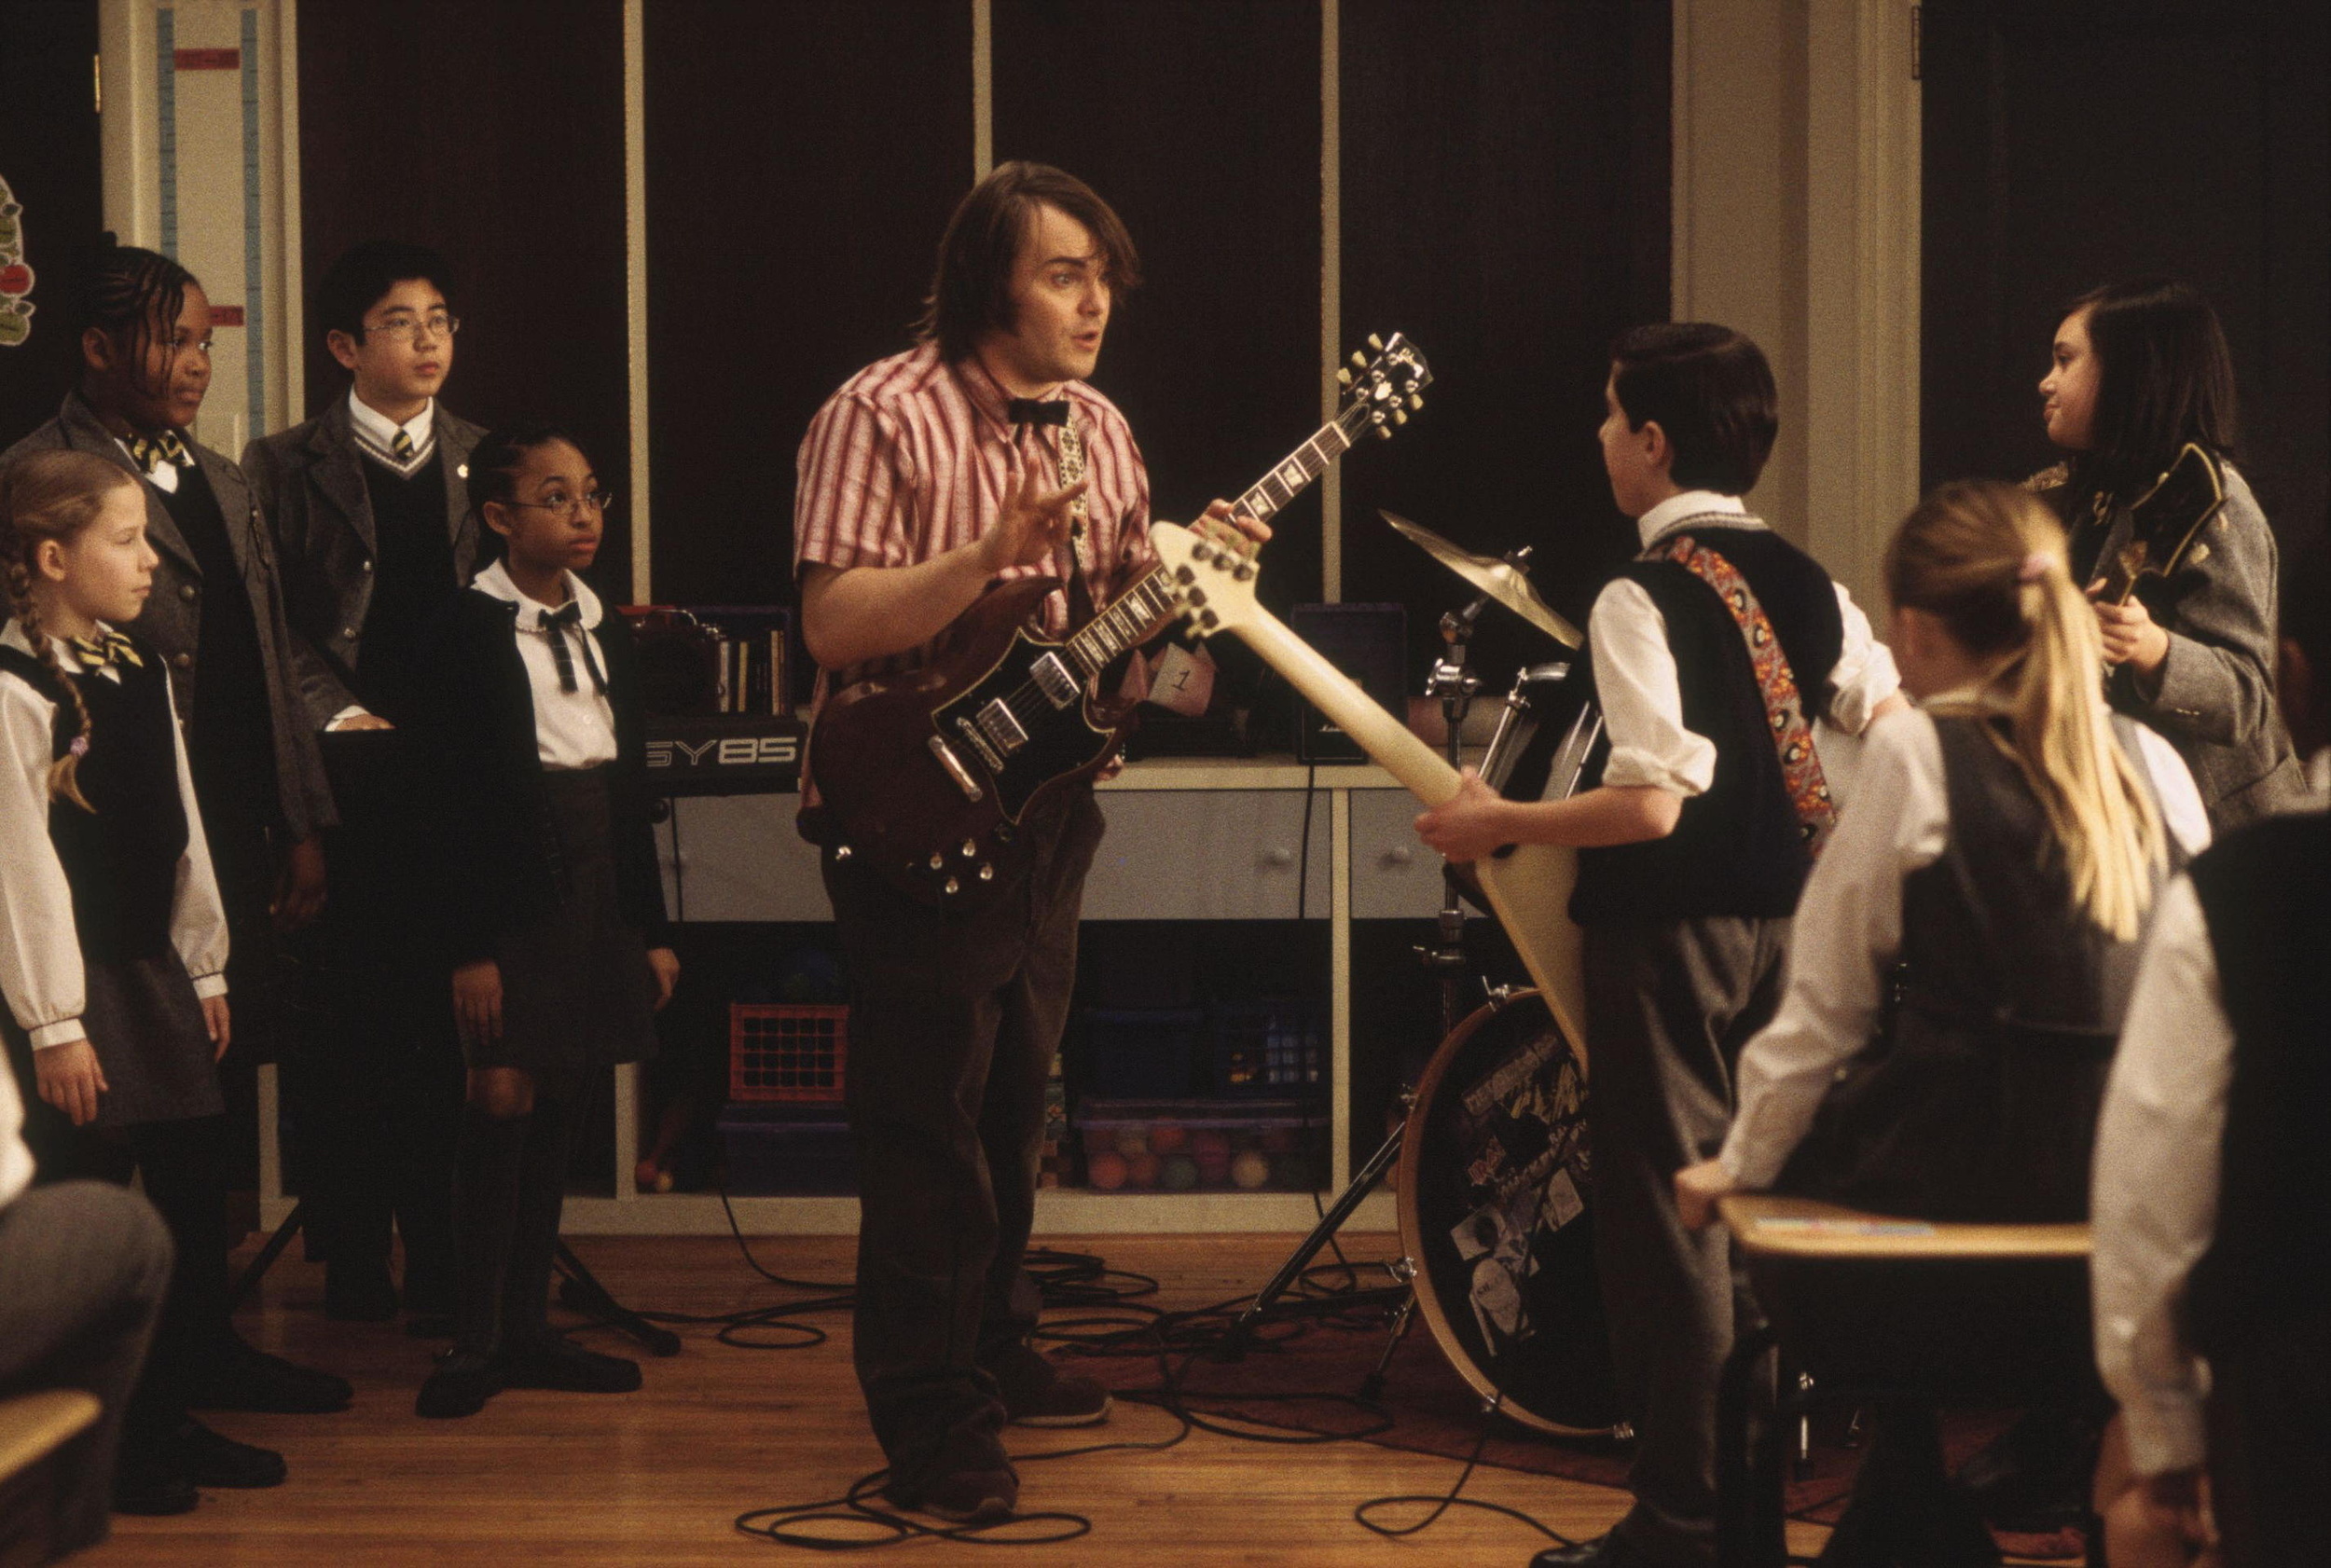 <p>White got the inspiration for <em>School of Rock</em> in part from the Langley Schools Music Project. Basically, back in 1970s, a teacher in British Columbia had recorded a bunch of kids at four schools in his district singing choral versions of pop hits of the time. It came out…kind of spooky. The records were not notable at the time, but in the early 2000s, they were discovered, released, and quickly became a cult object. This happened in 2001, and <em>School of Rock</em> would be released in 2003.</p>